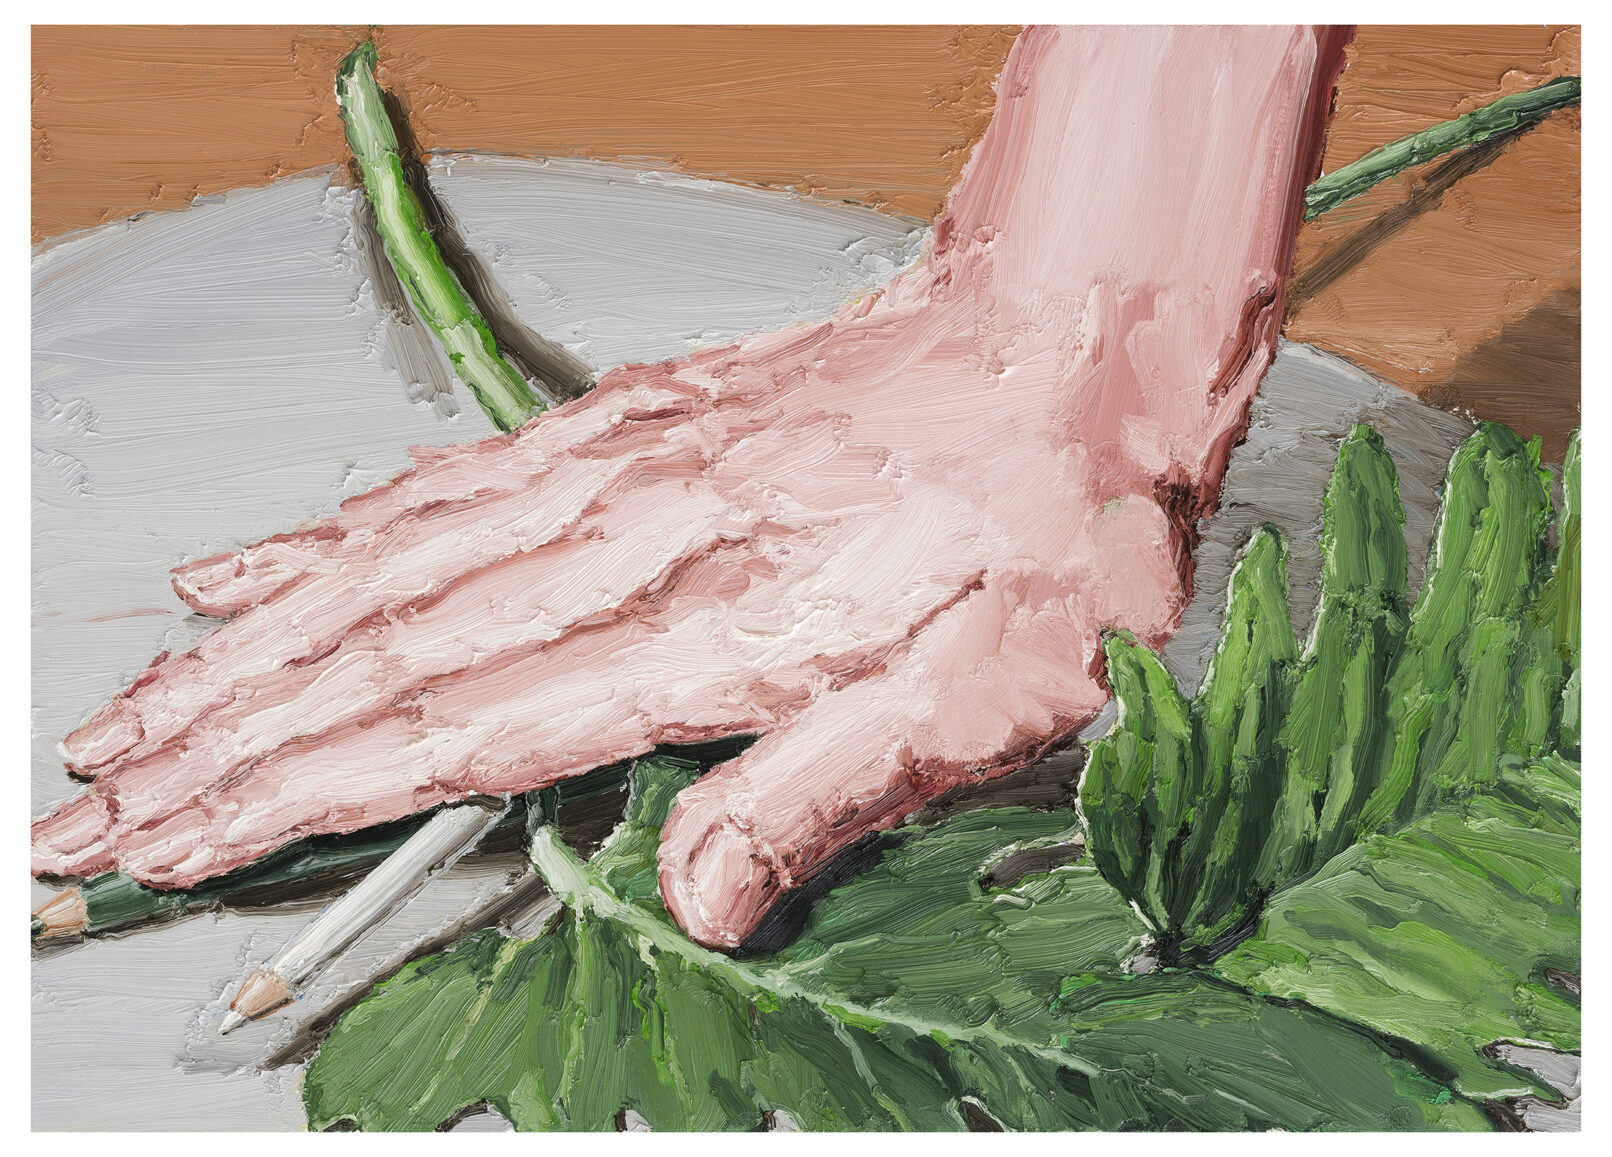 Hand and leaves